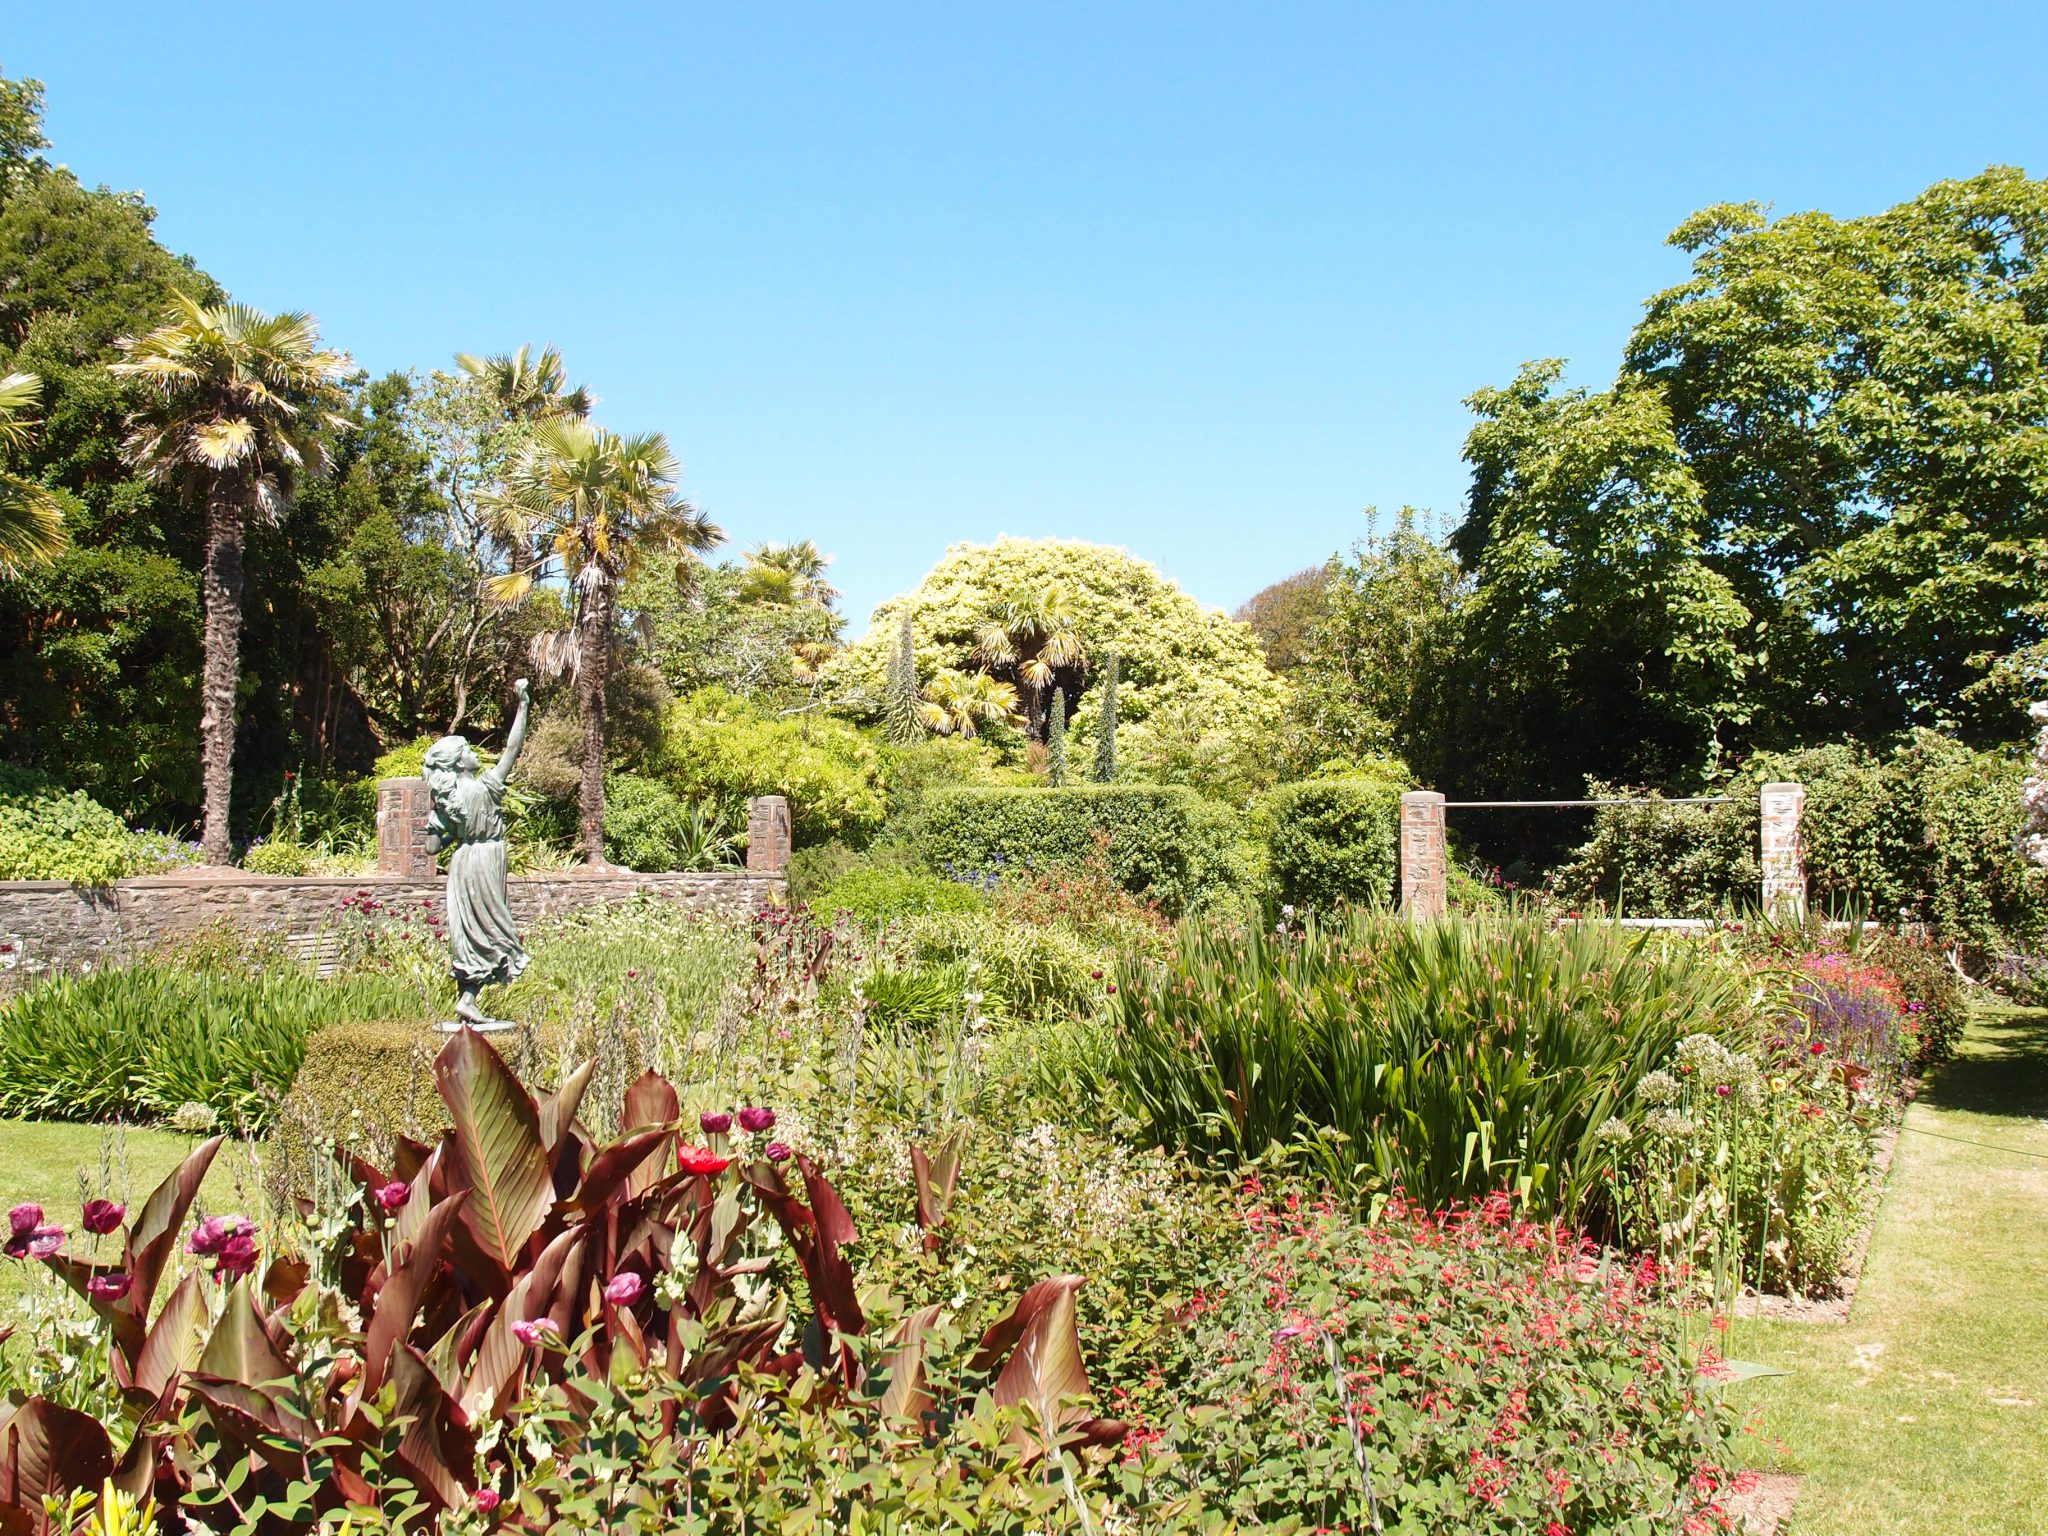  We enter the Statue Garden, which contains lush plantings of tender perennials: poppies, salvias, agapanthus, cannas, kniphofias, inulas and heleniums…all chosen as sources of food for the bees and butterflies who flock there, from early June through the end of Autumn. 